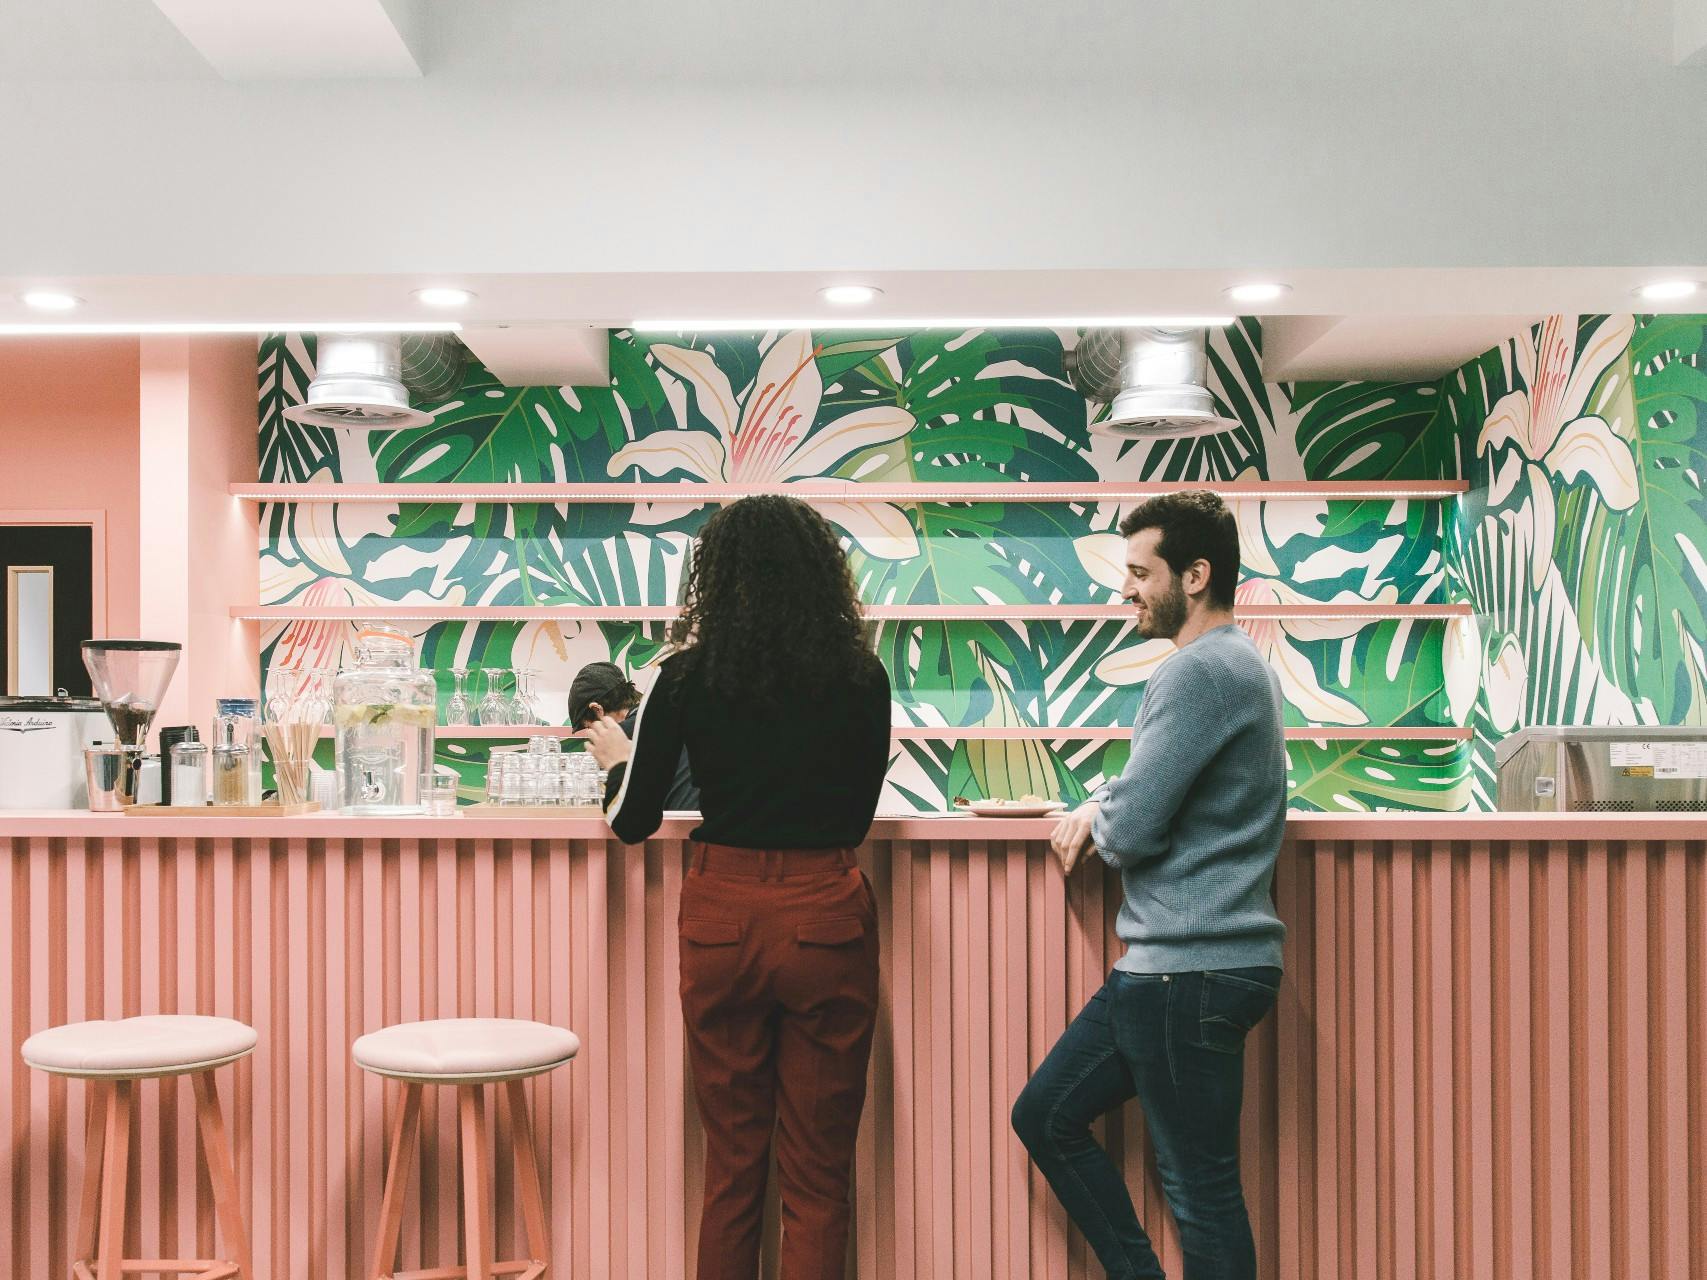 People in Huckletree Manchester